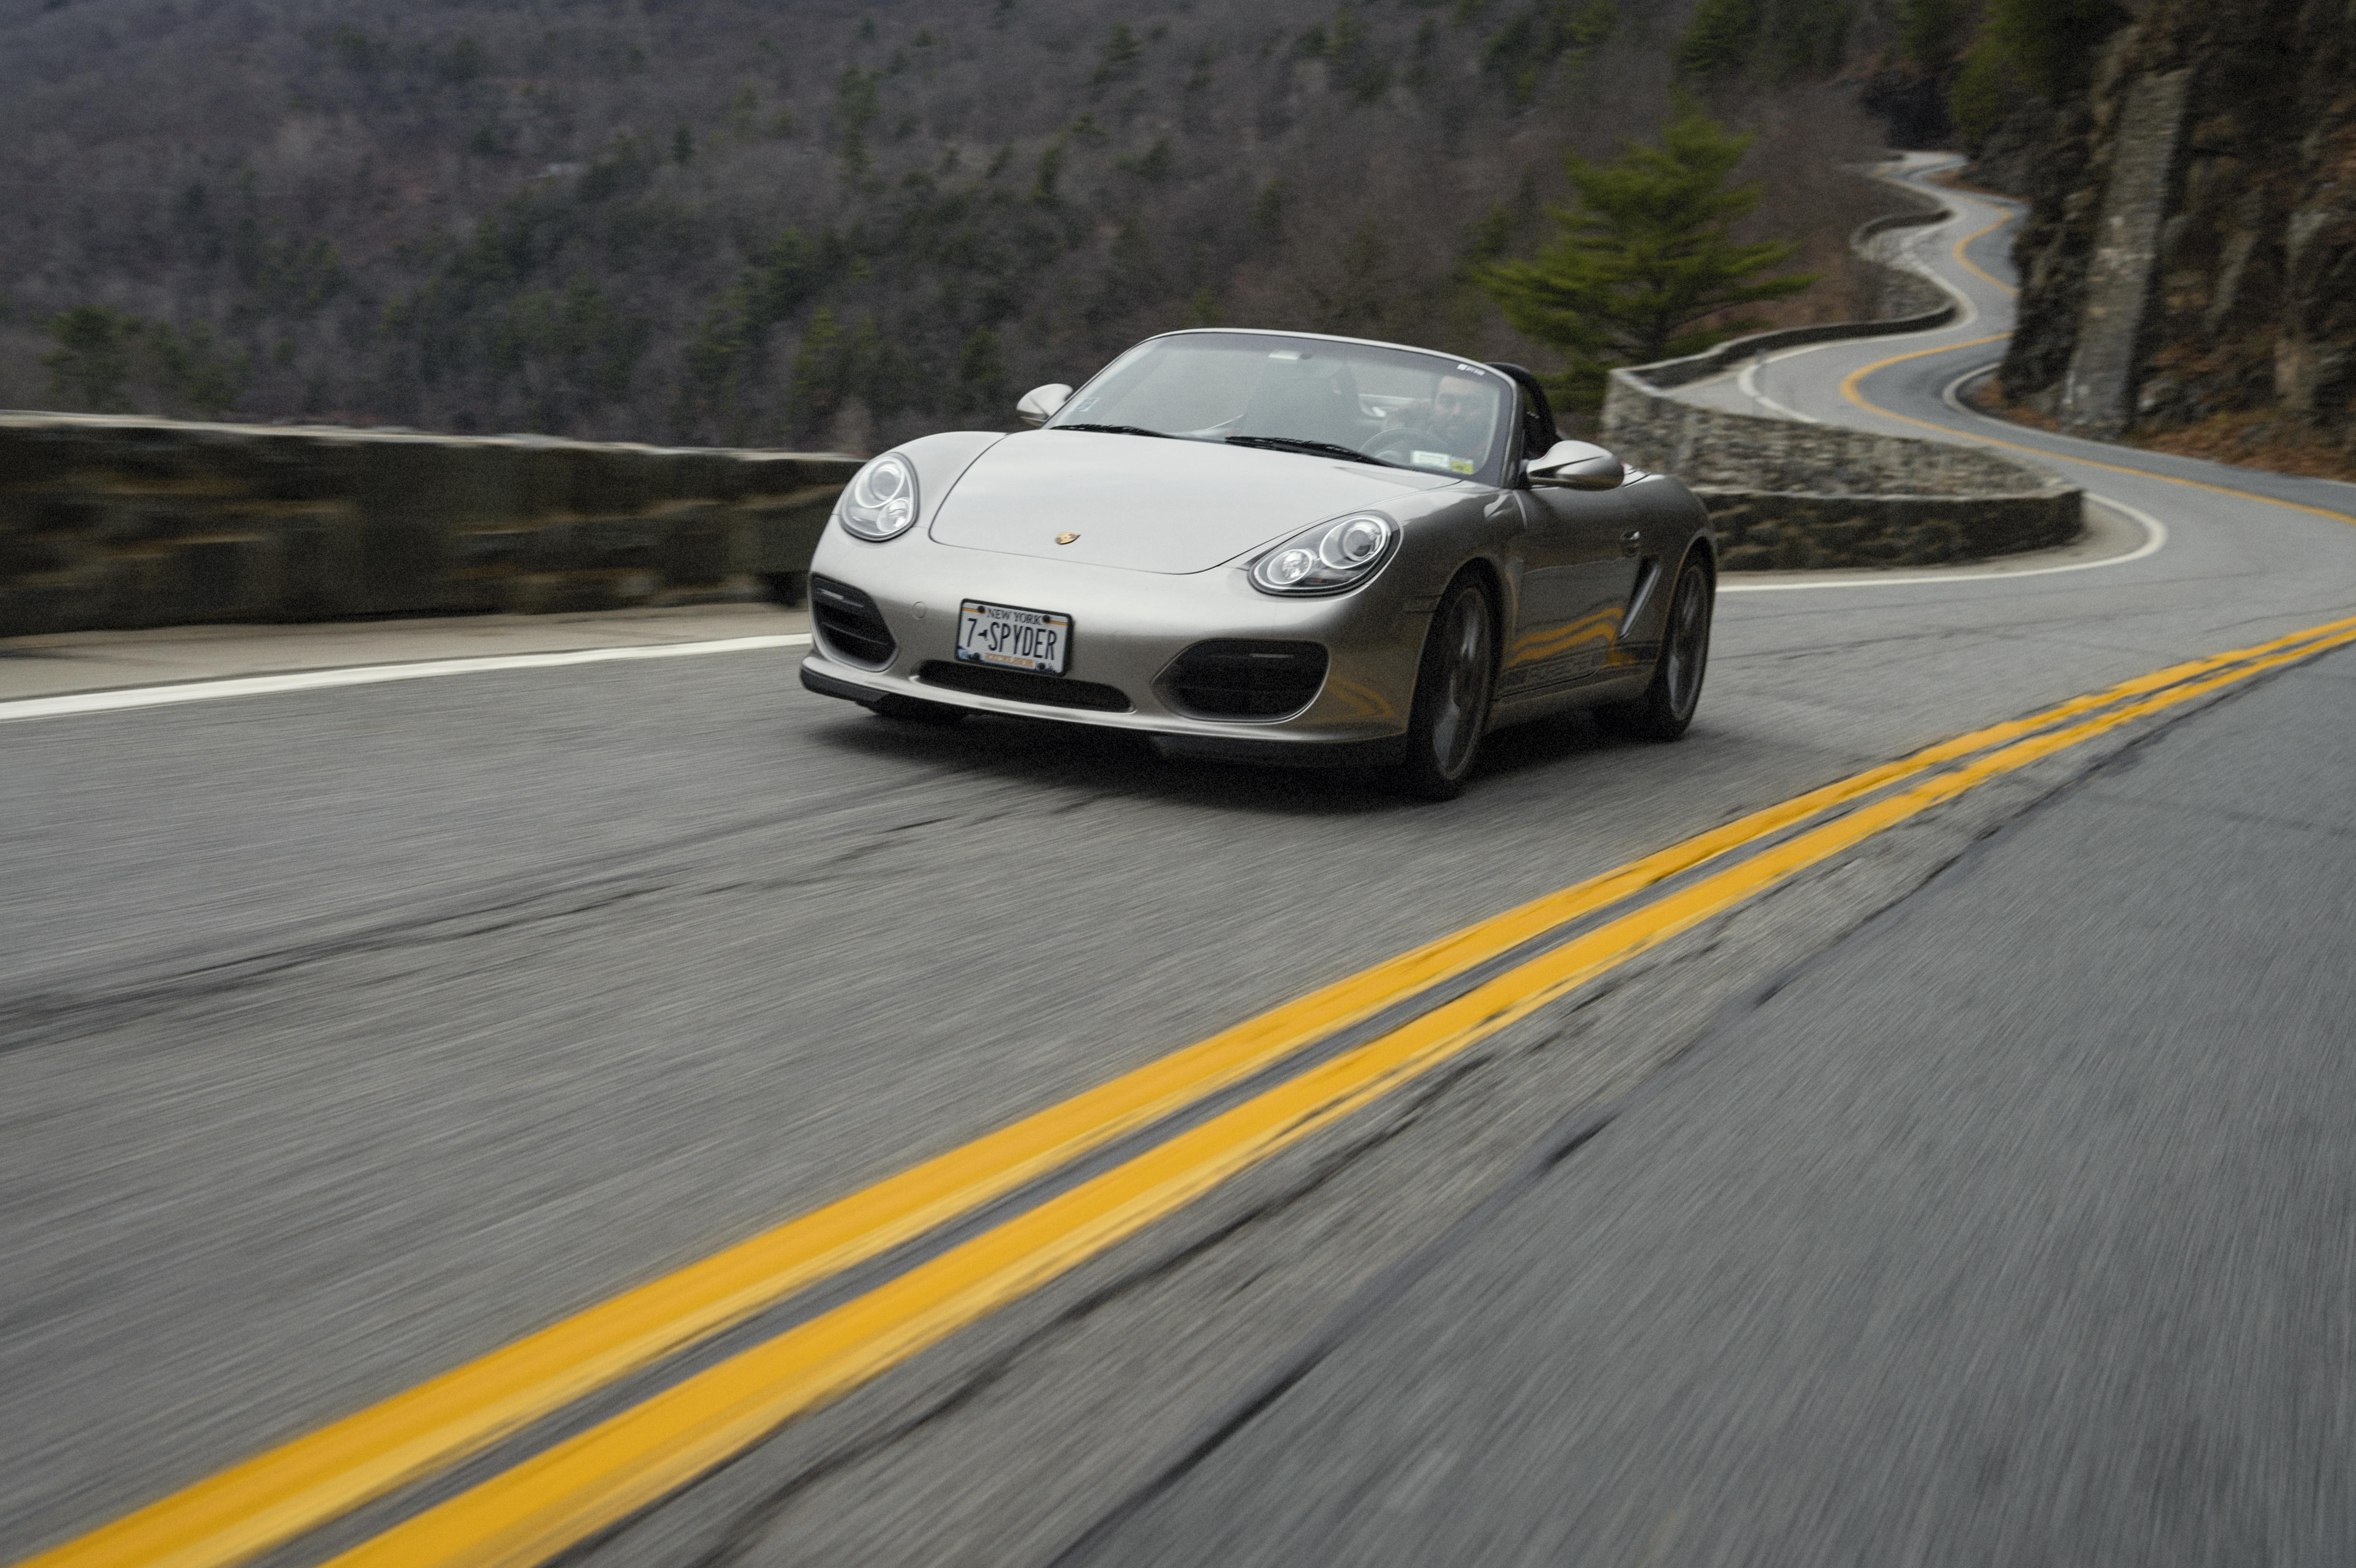 Porsche Boxster Spyder driving on winding mountain road